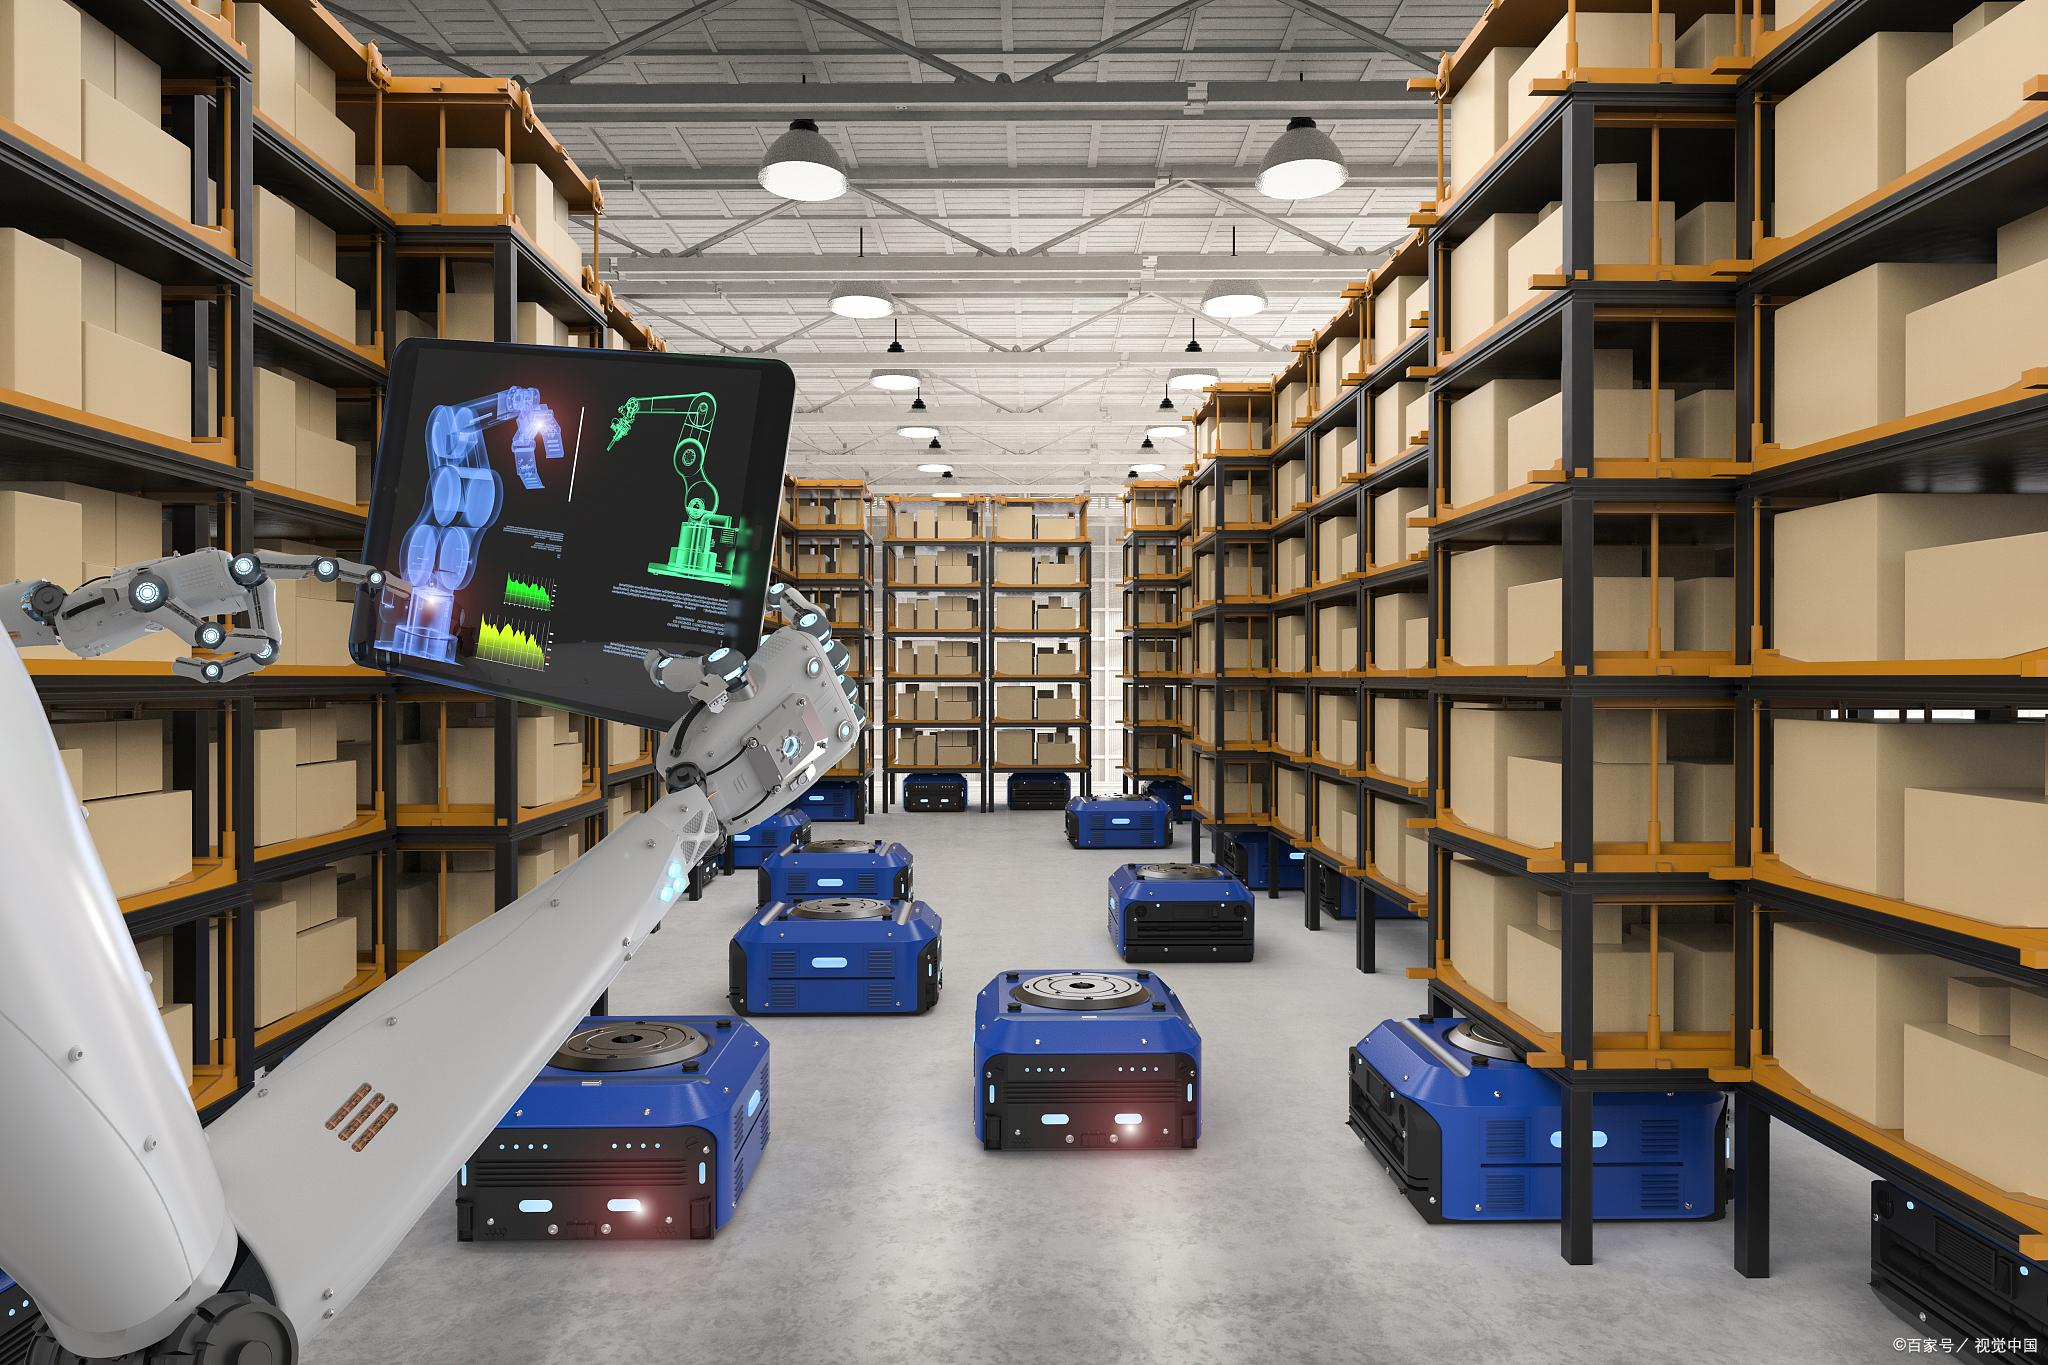 Intelligent sorting equipment: a sharp tool for improving logistics efficiency, analysis of the current industry situation